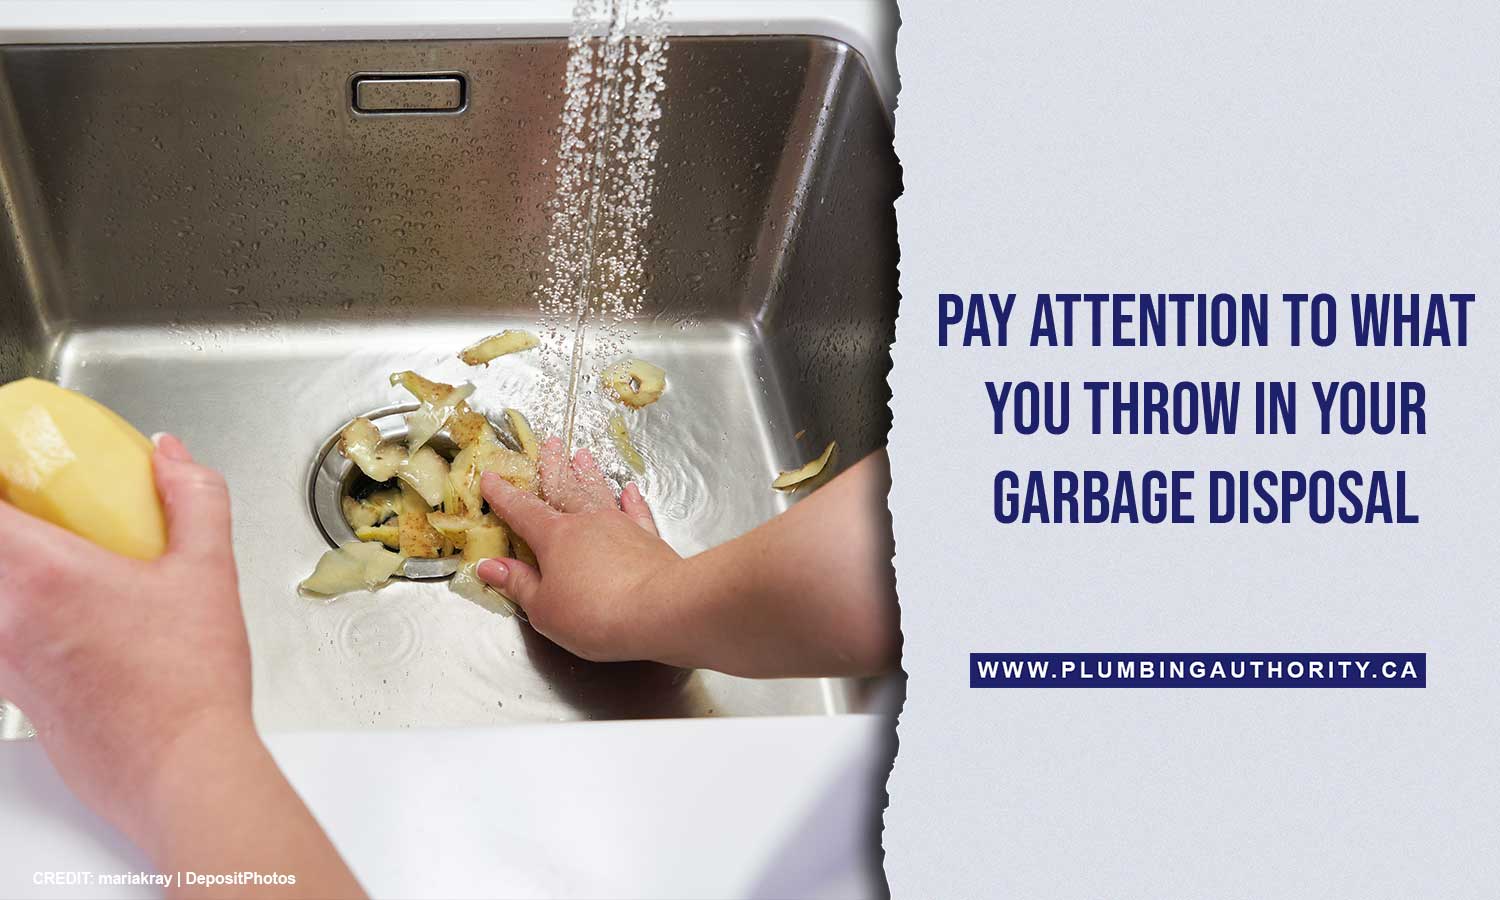 Pay attention to what you throw in your garbage disposal